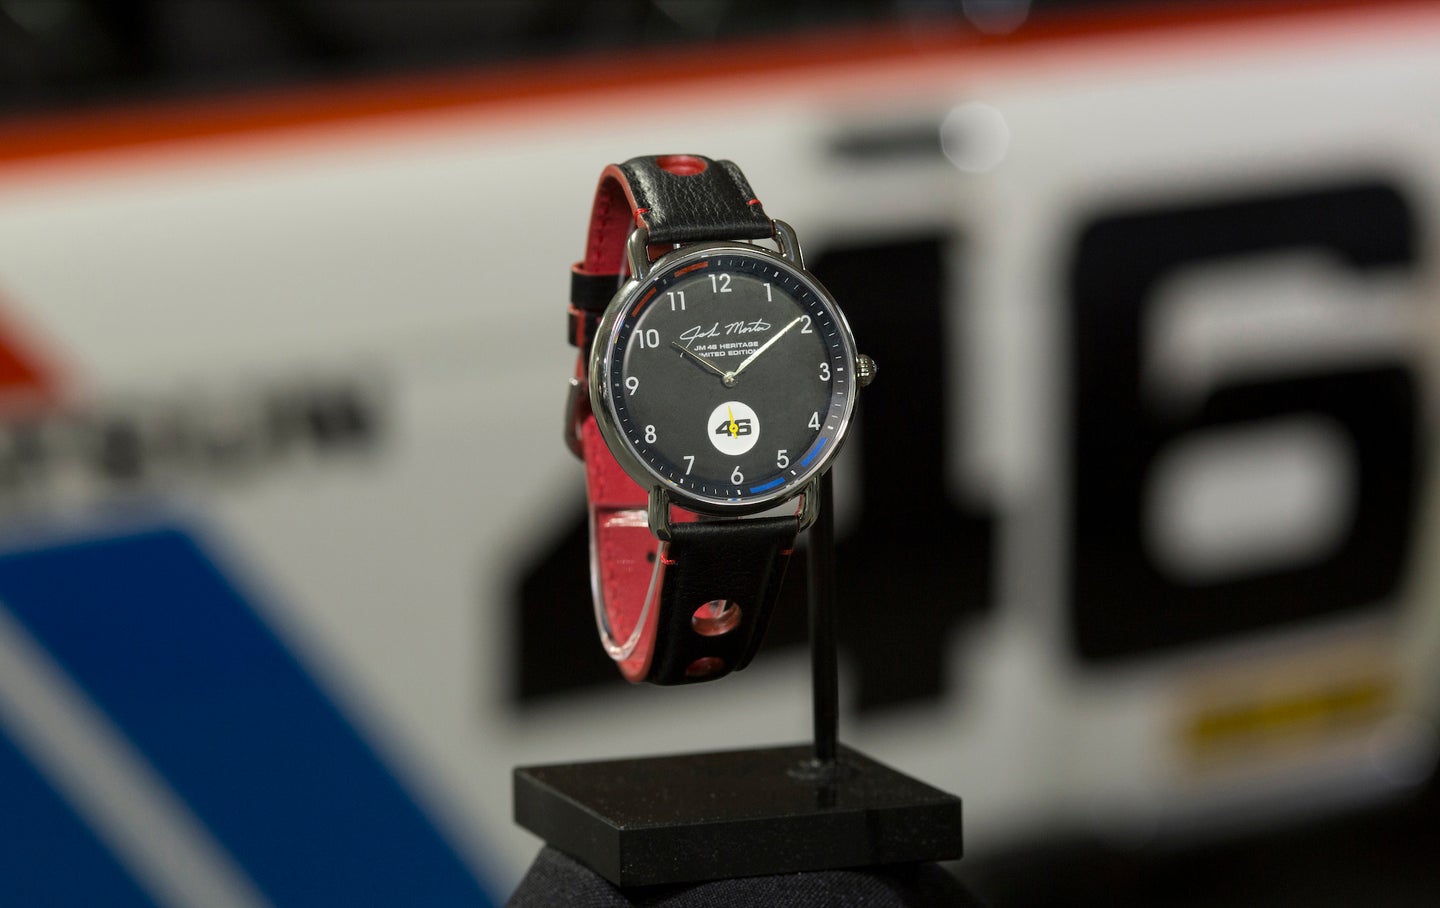 This Watch Is Made From Actual Parts of Championship-Winning Datsun BRE 510 Race Car